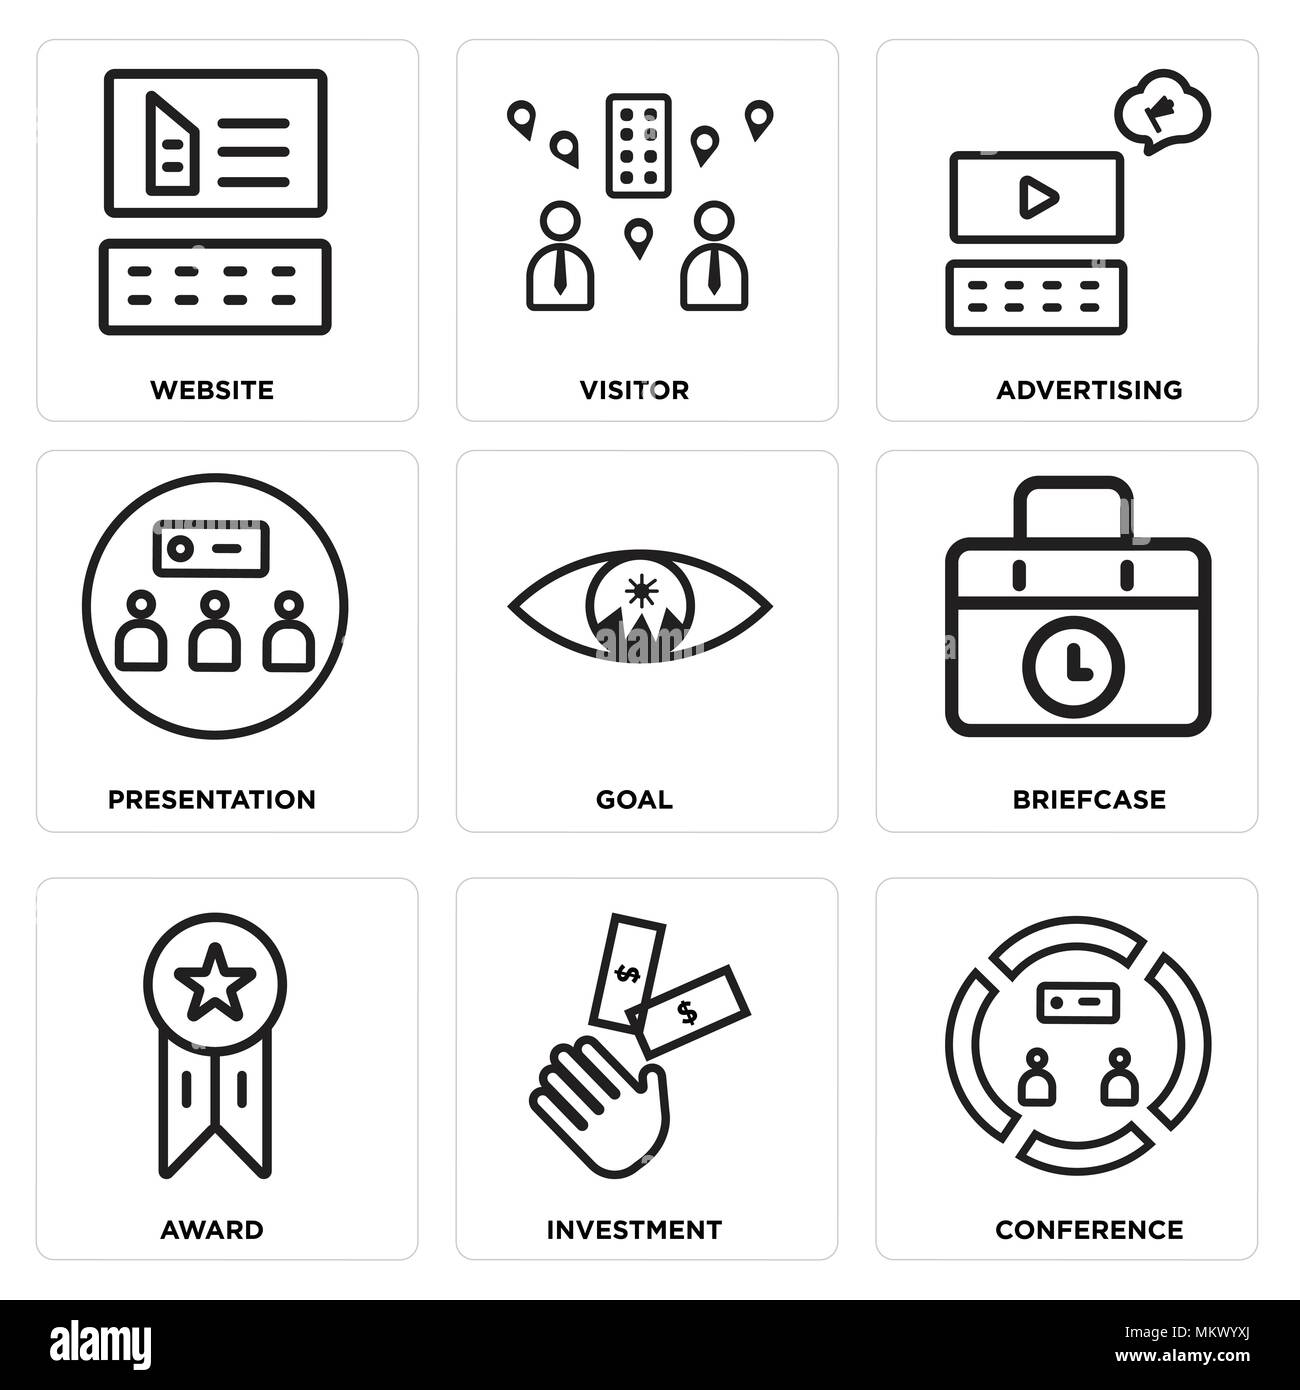 Set Of 9 simple editable icons such as Conference, Investment, Award, Briefcase, Goal, Presentation, Advertising, Visitor, Website, can be used for mo Stock Vector